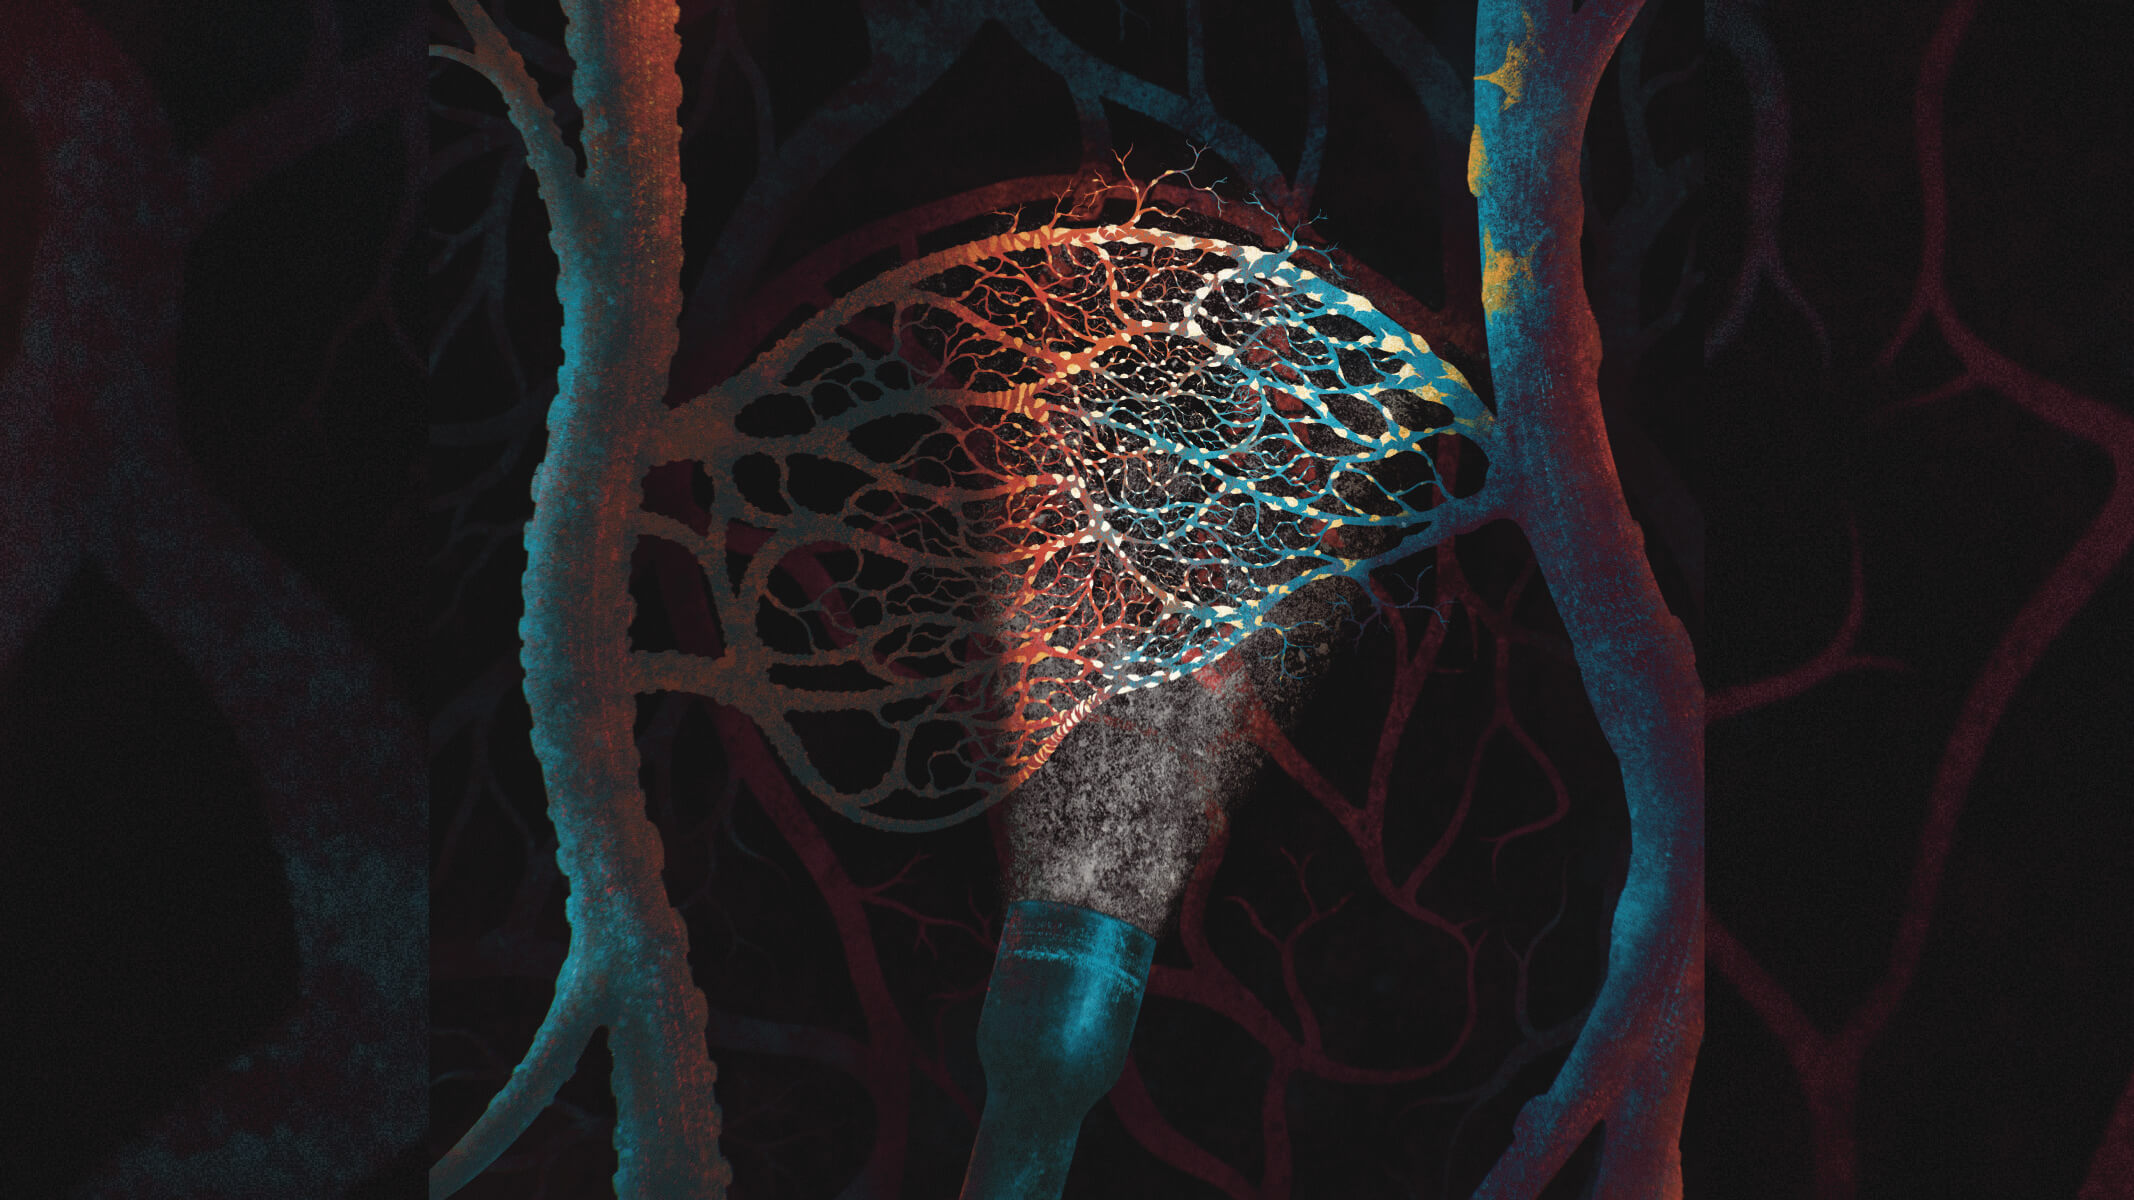 A new technique developed by AHA-Allen Initiative-funded researchers at the Stanford University School of Medicine is shining light on the blood vessels that supply the brain. Illustration by Valentina Galata.